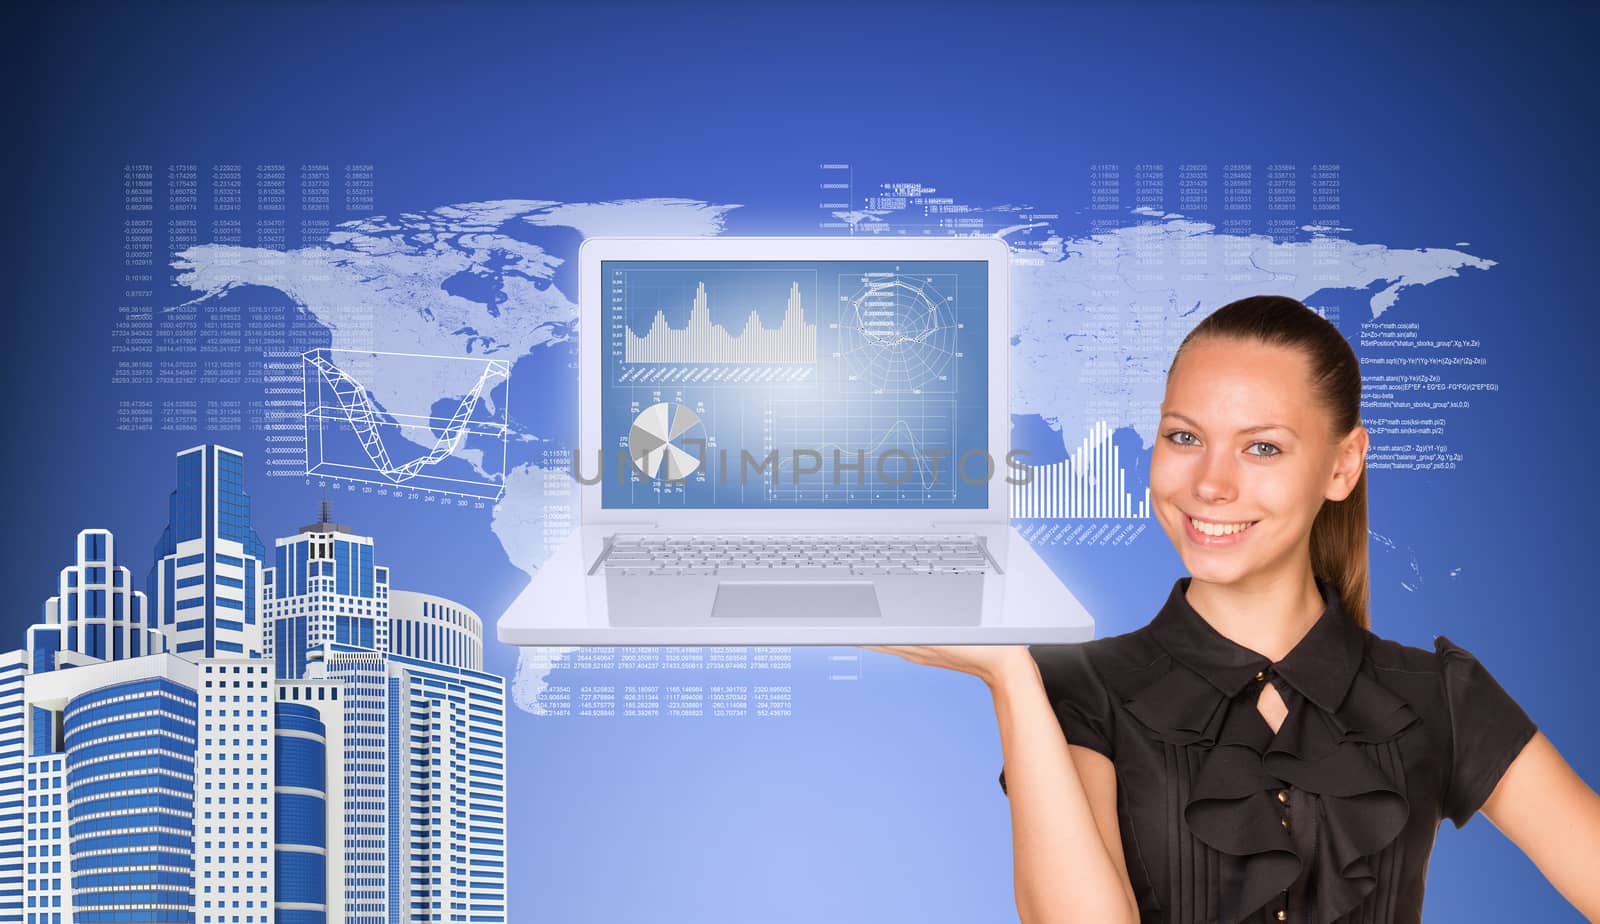 Beautiful businesswoman in dress smiling and holding latop with graphs. Buildings, world map and text rows as backdrop